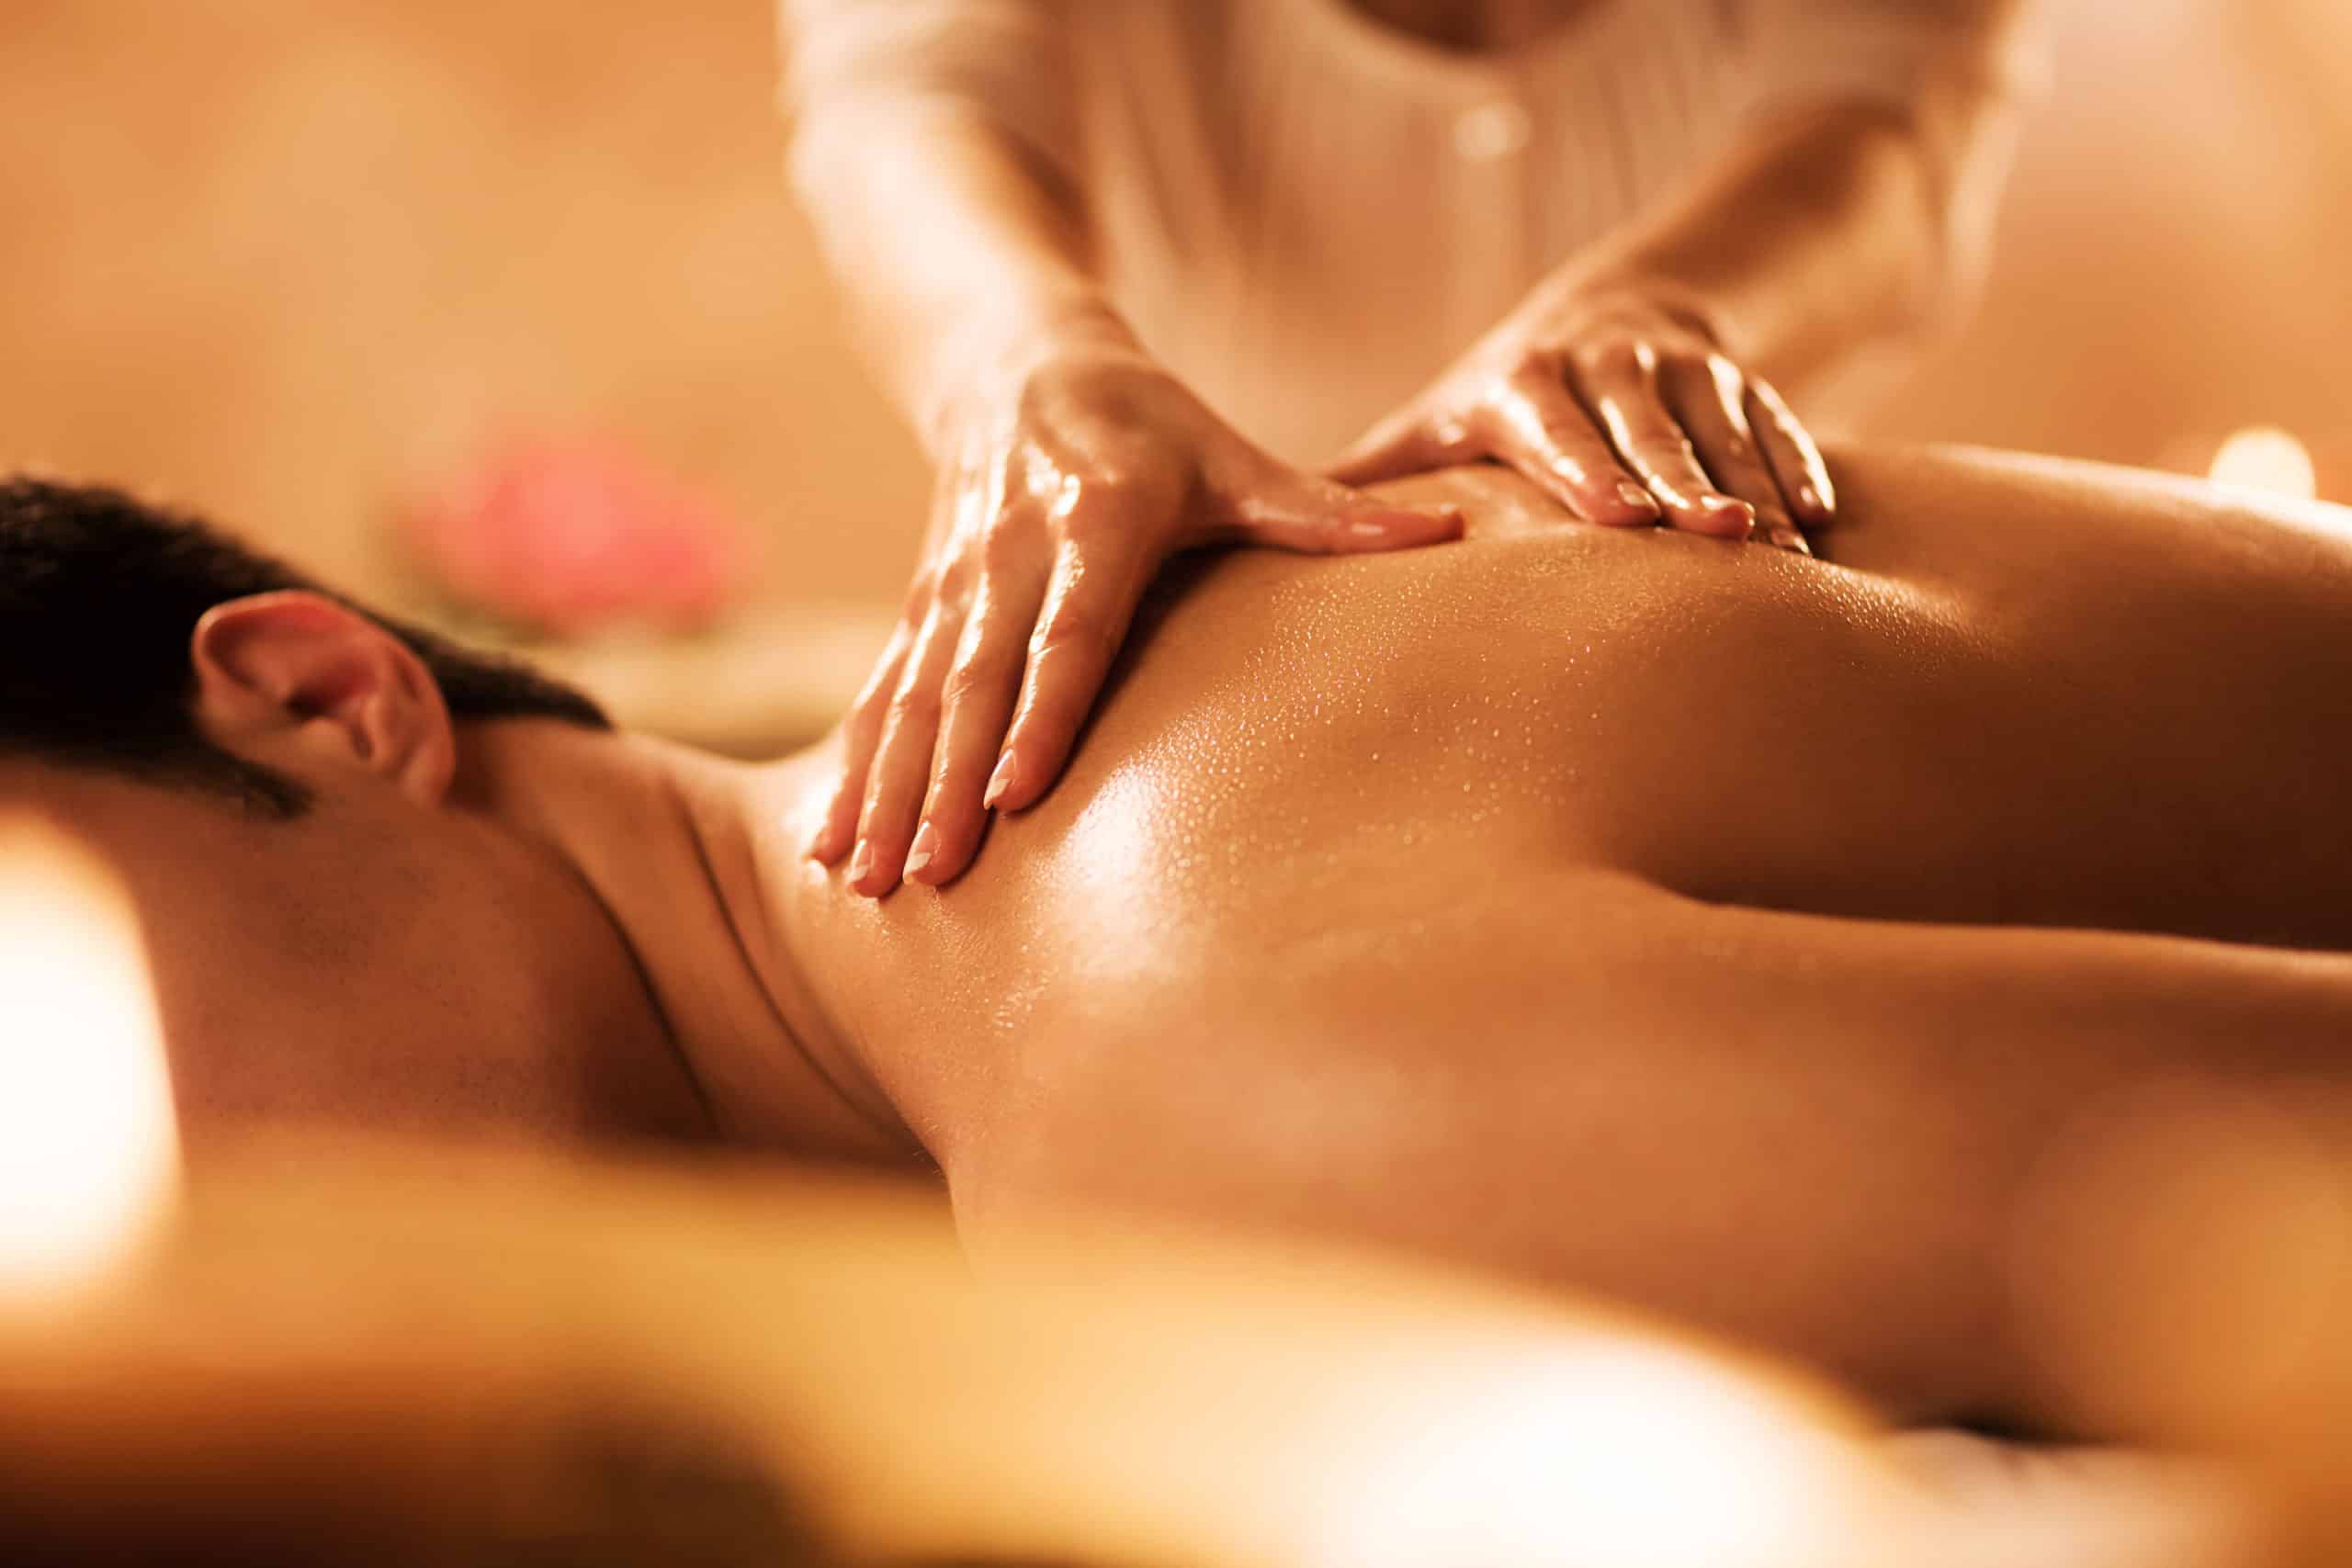 Formations massages Montpellier Anmo ruina 